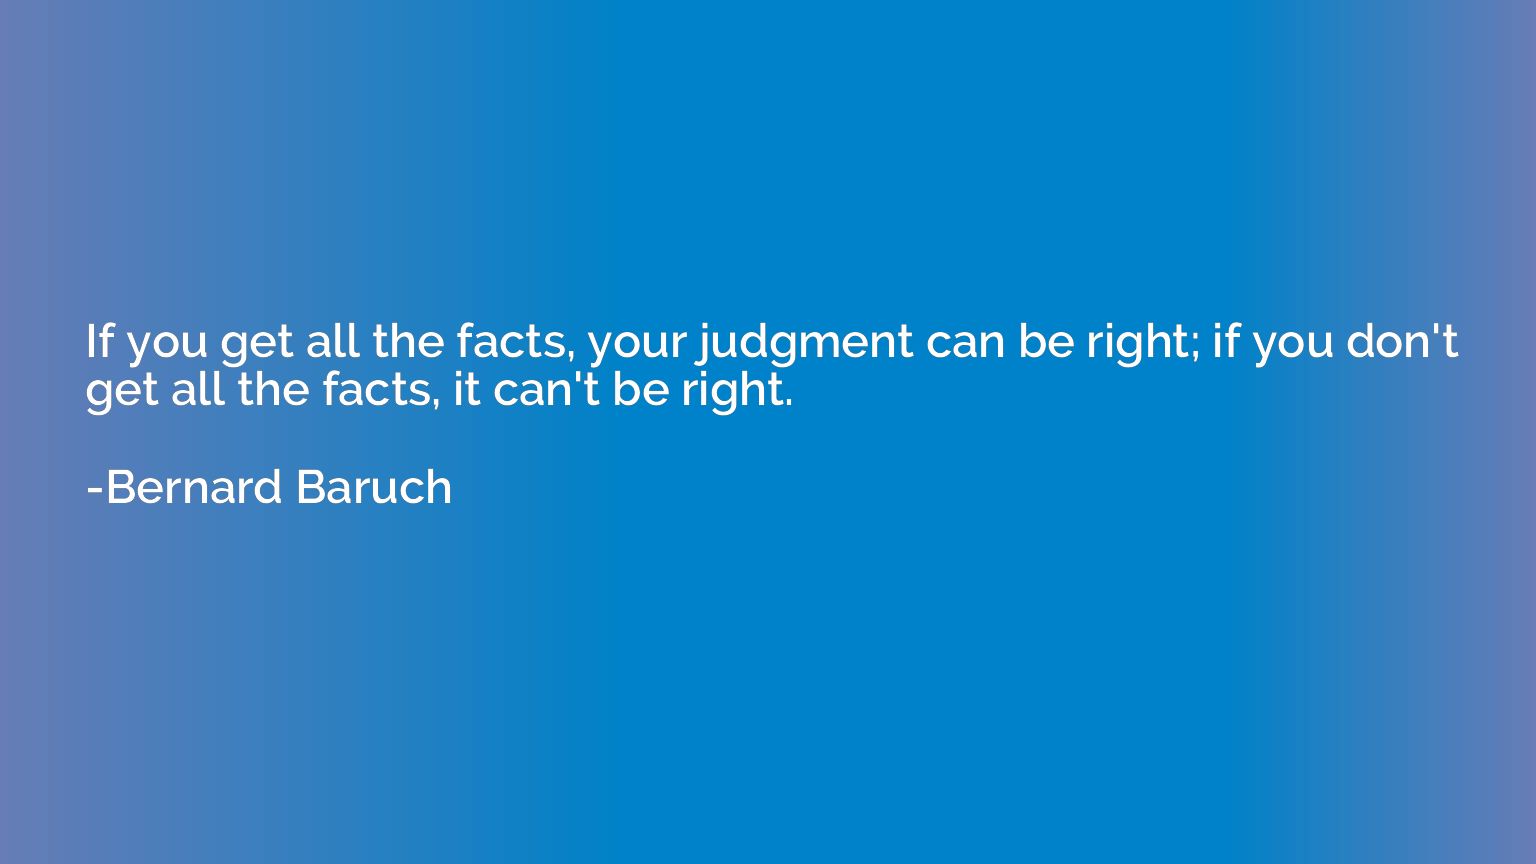 If you get all the facts, your judgment can be right; if you